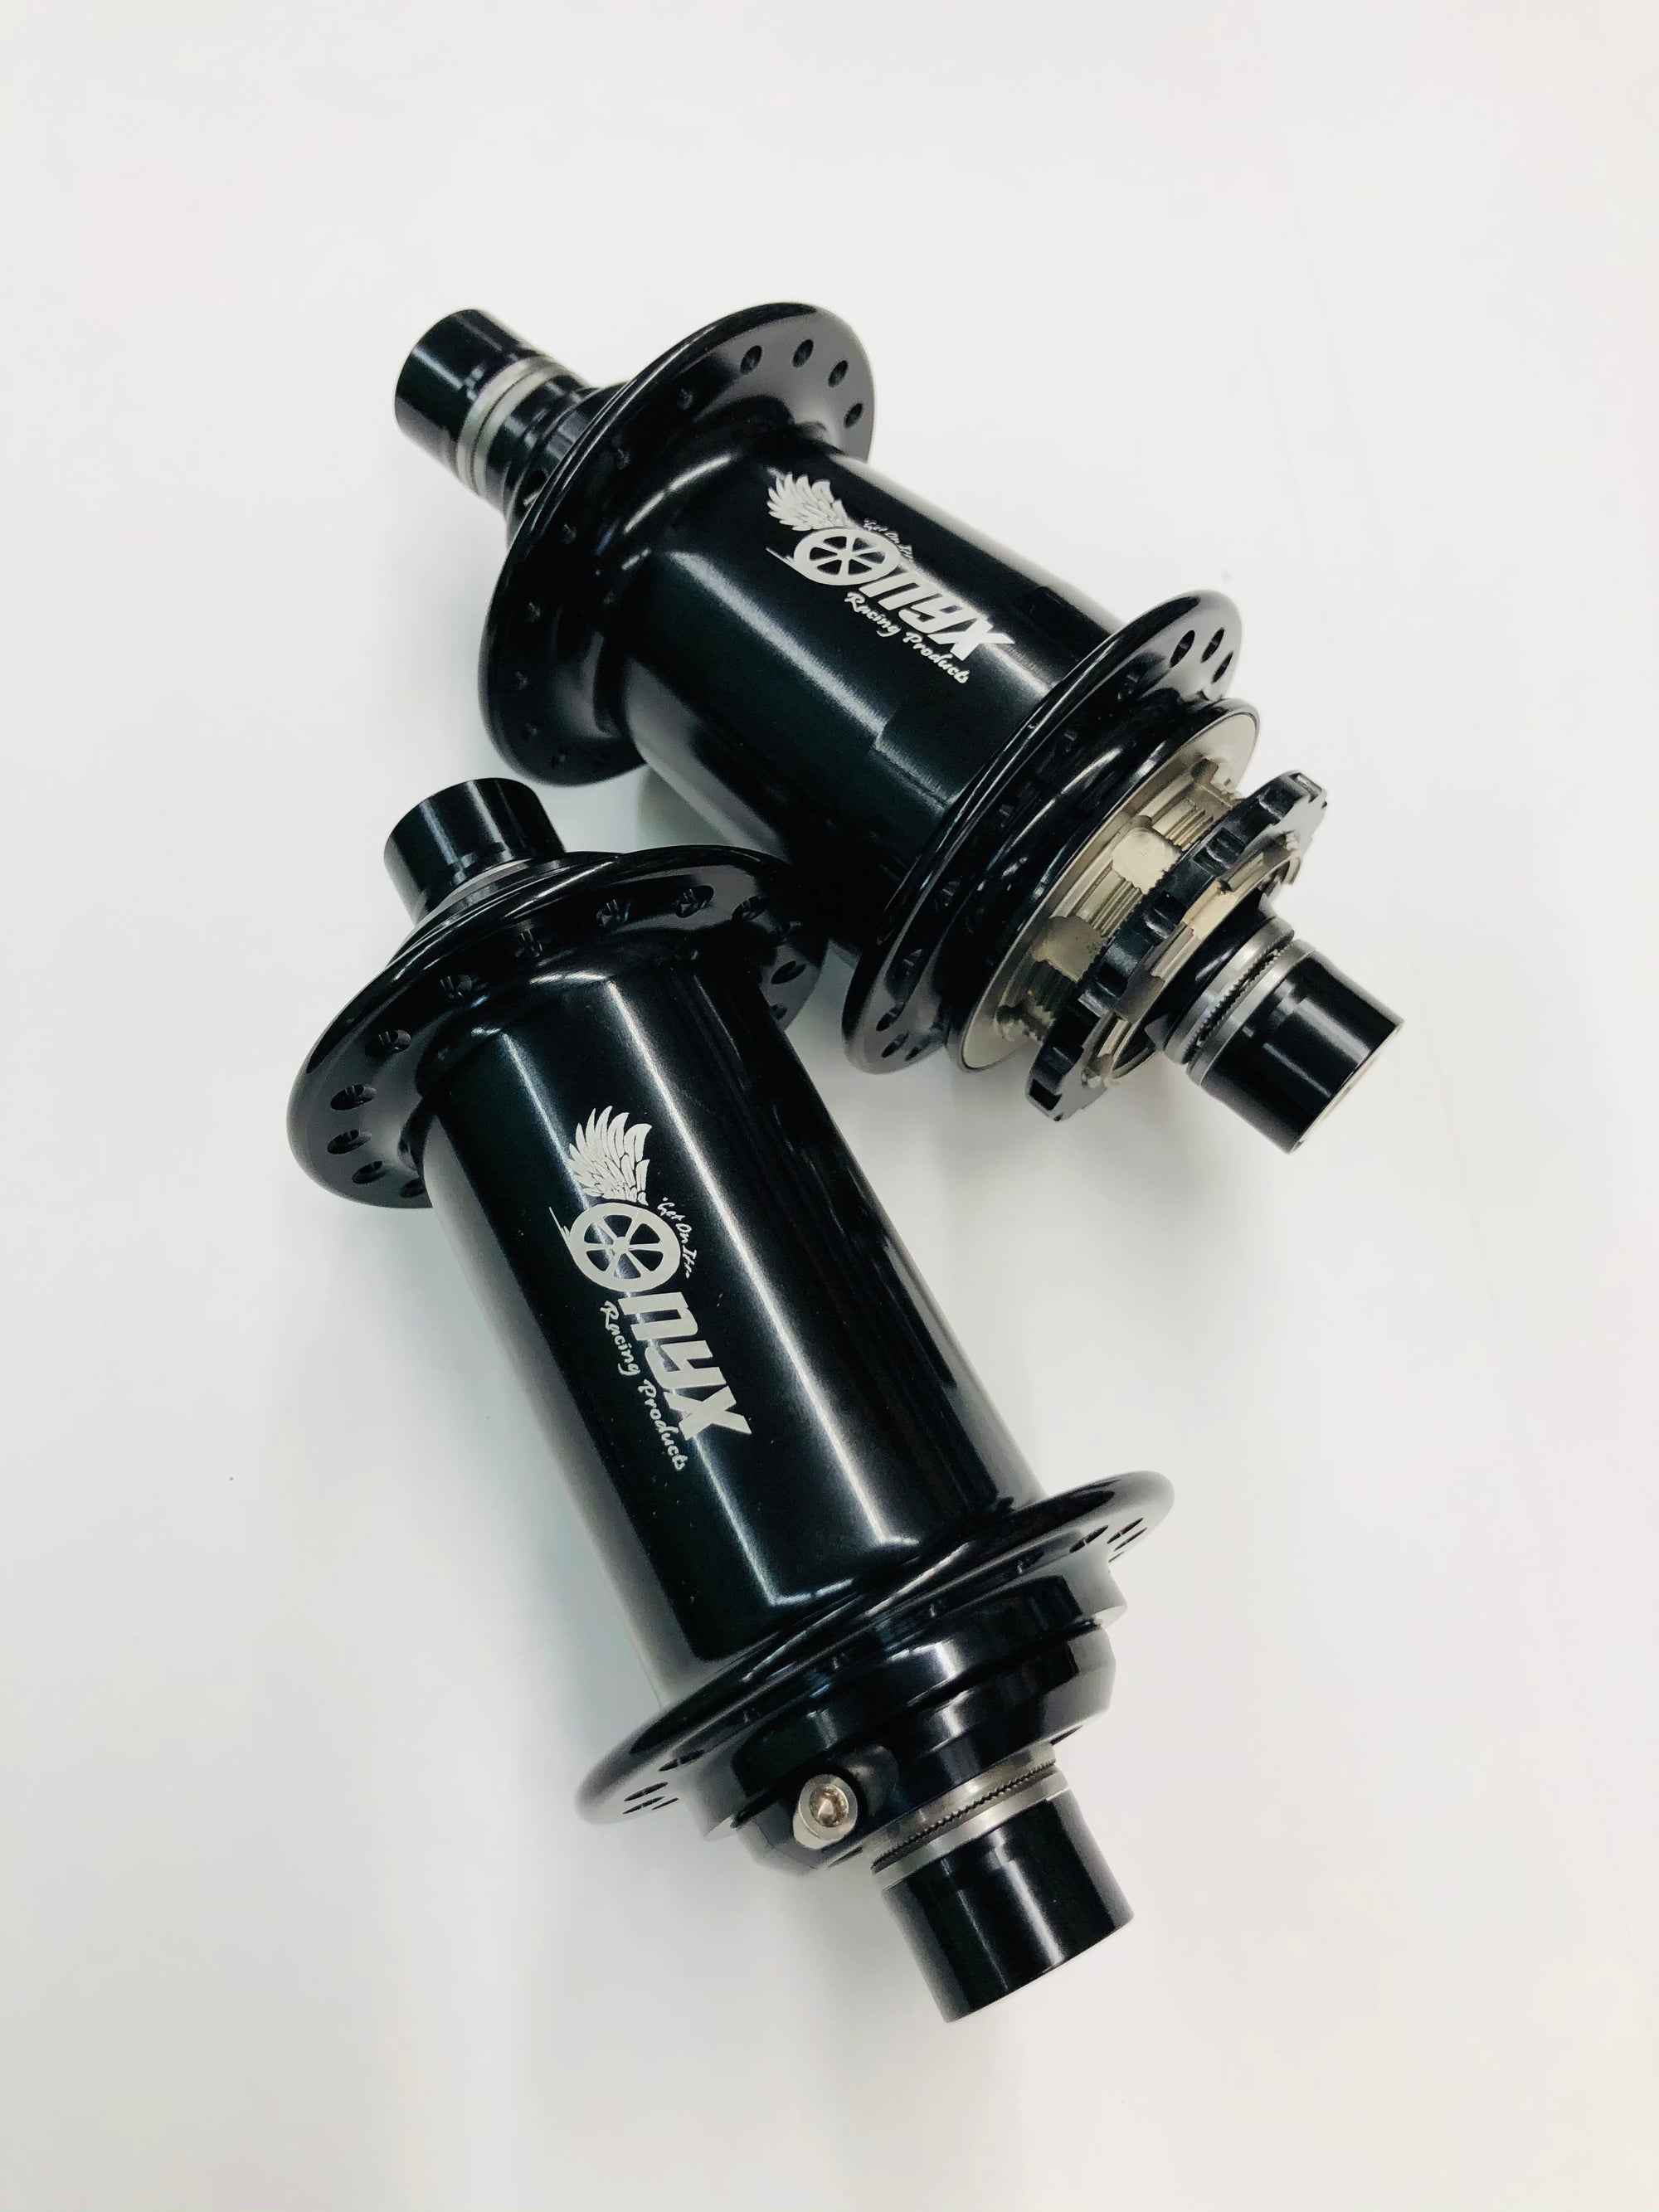 Onyx Ultra BMX Non-Disc Hubset - Black (36H) - Downtown Bicycle Works 